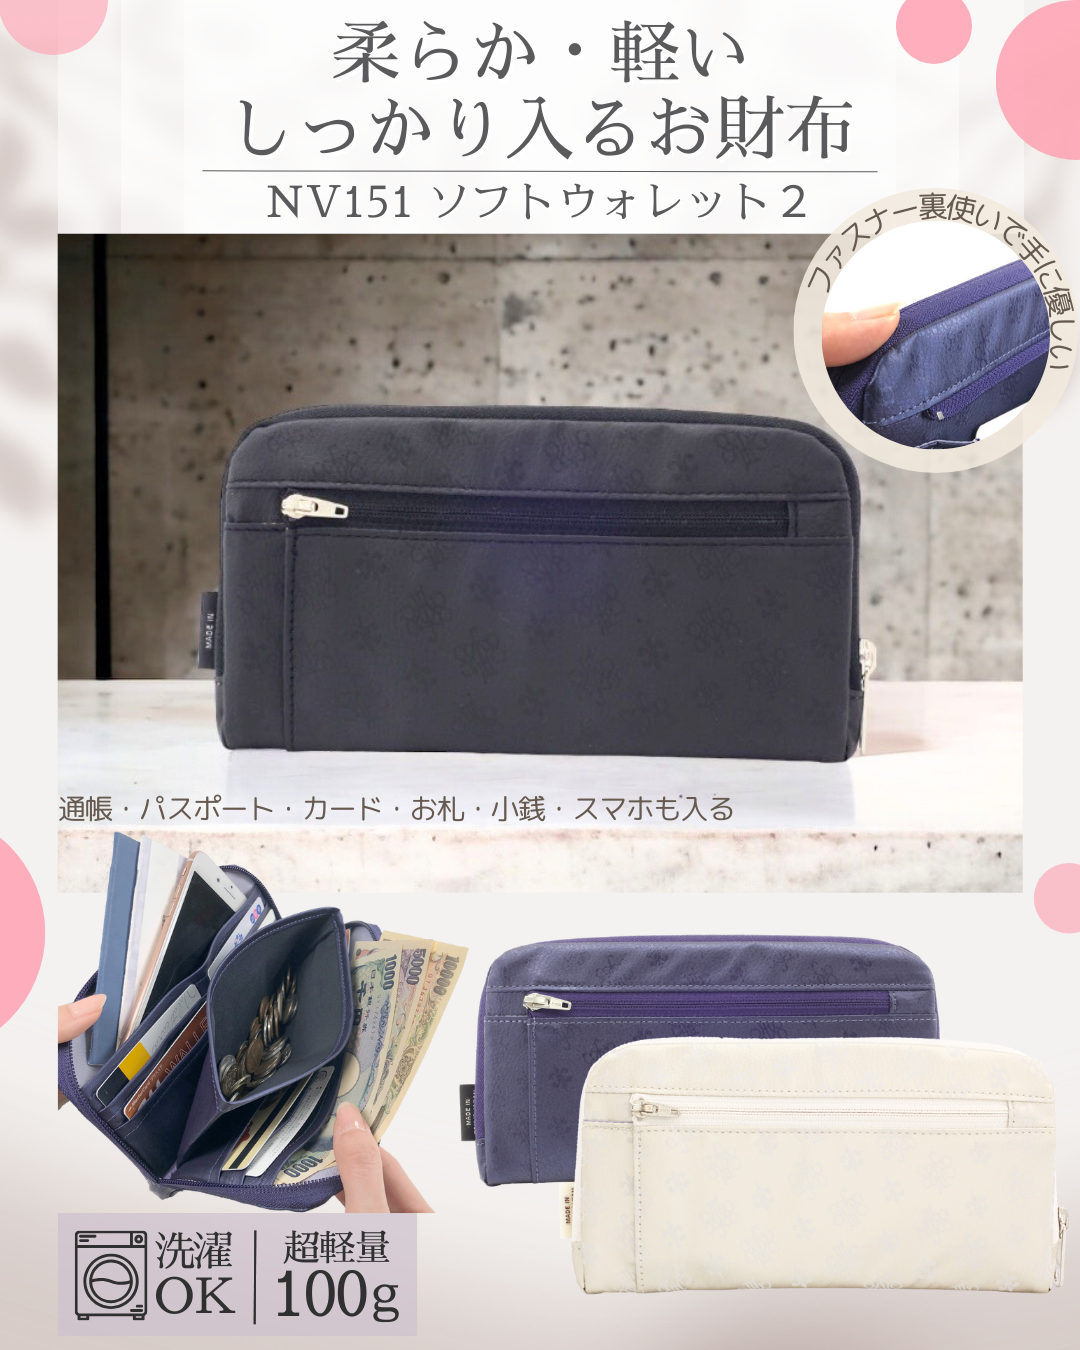 NV151 ソフトウォレット２｜ヤマト屋 公式通販サイト｜軽くて柔らかい 